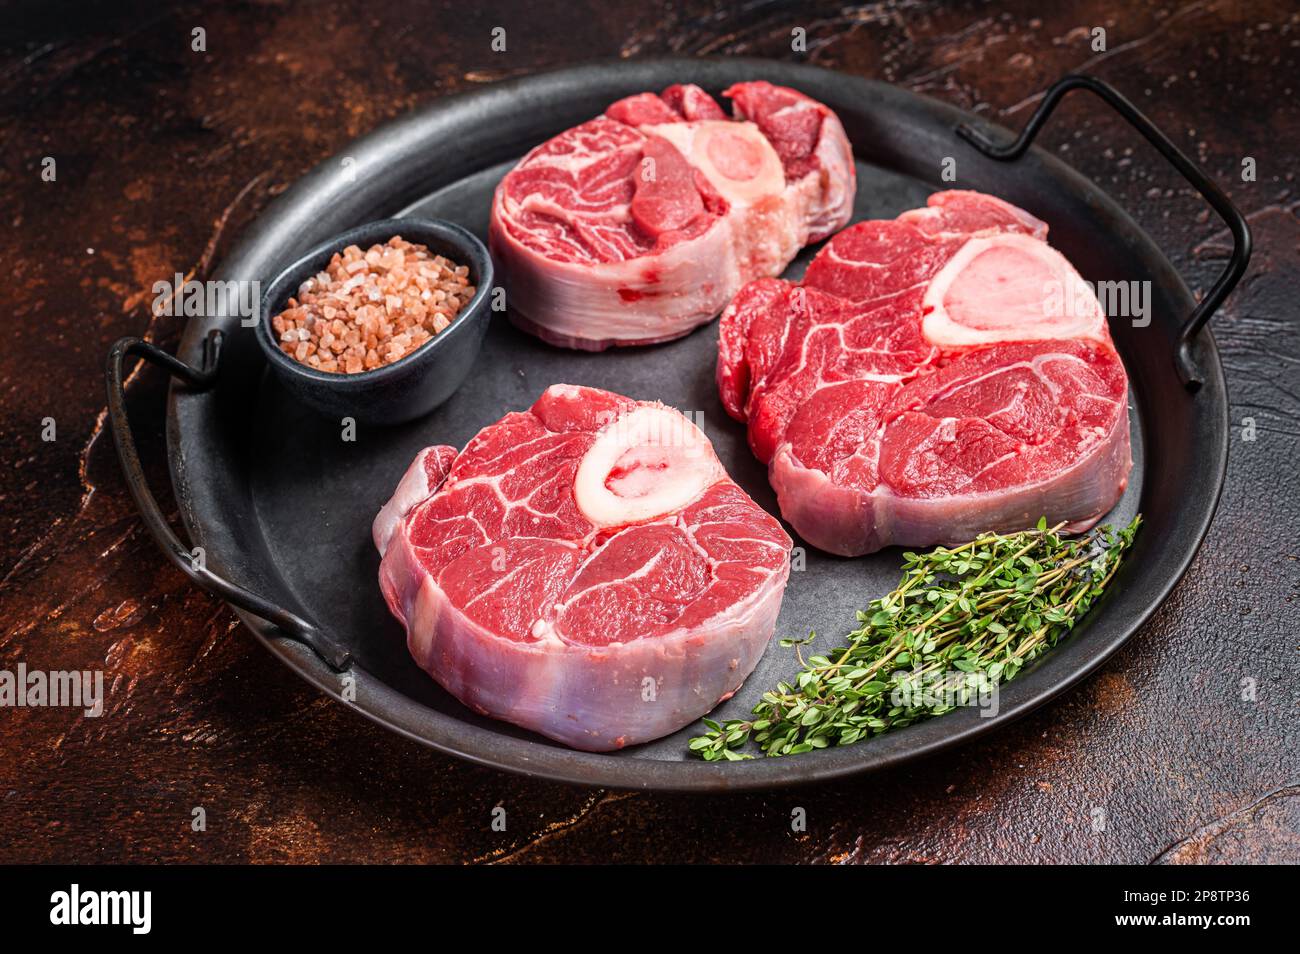 Raw Osso buco Veal shank steak, meat Ossobuco in steel tray. Dark background. Top view. Stock Photo